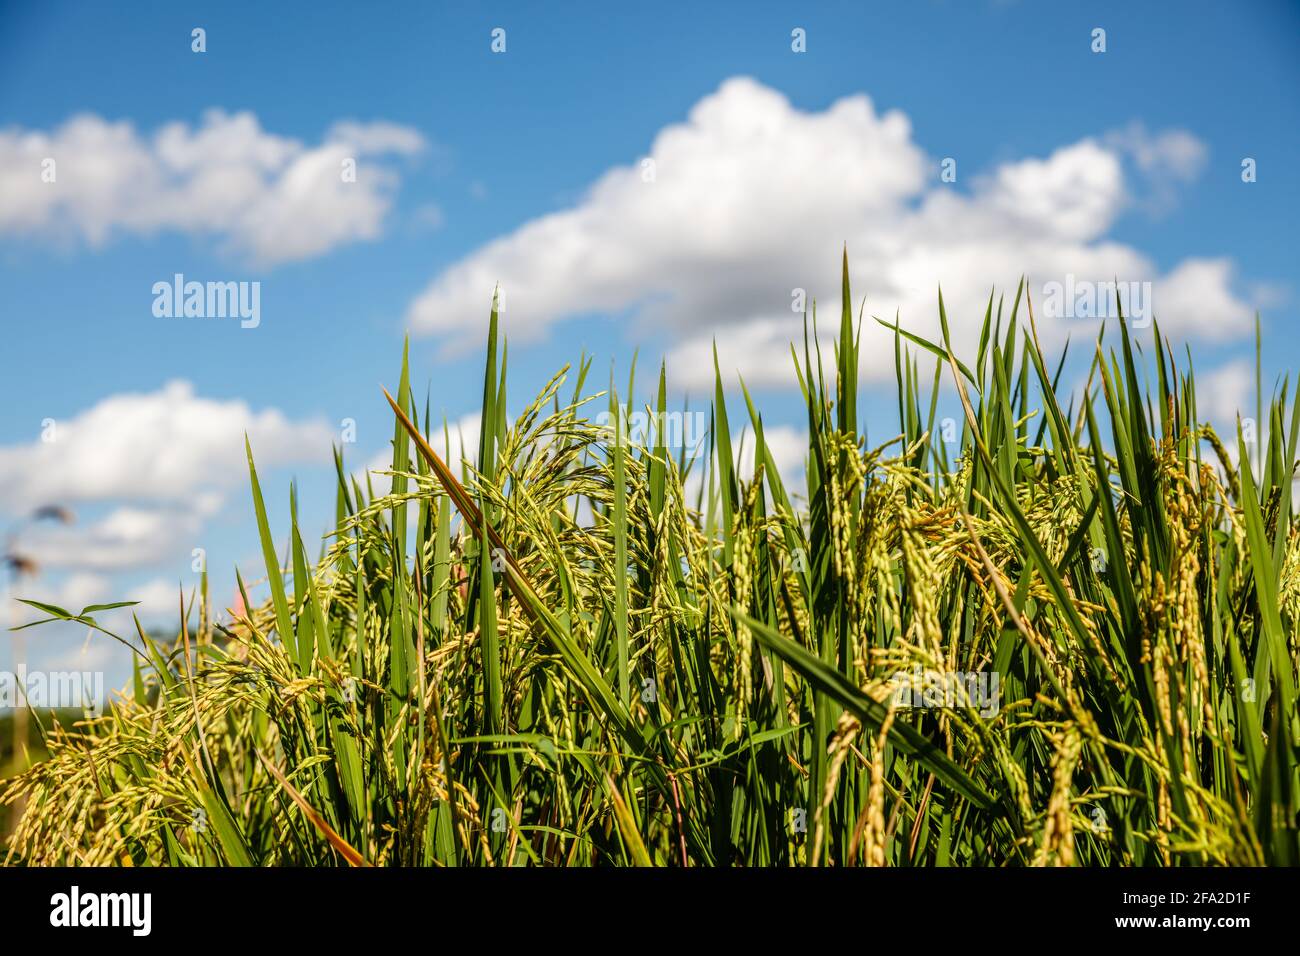 Rice field with ripe rice ready for harvesting. Blue sky with white clouds. Bali, Indonesia Stock Photo